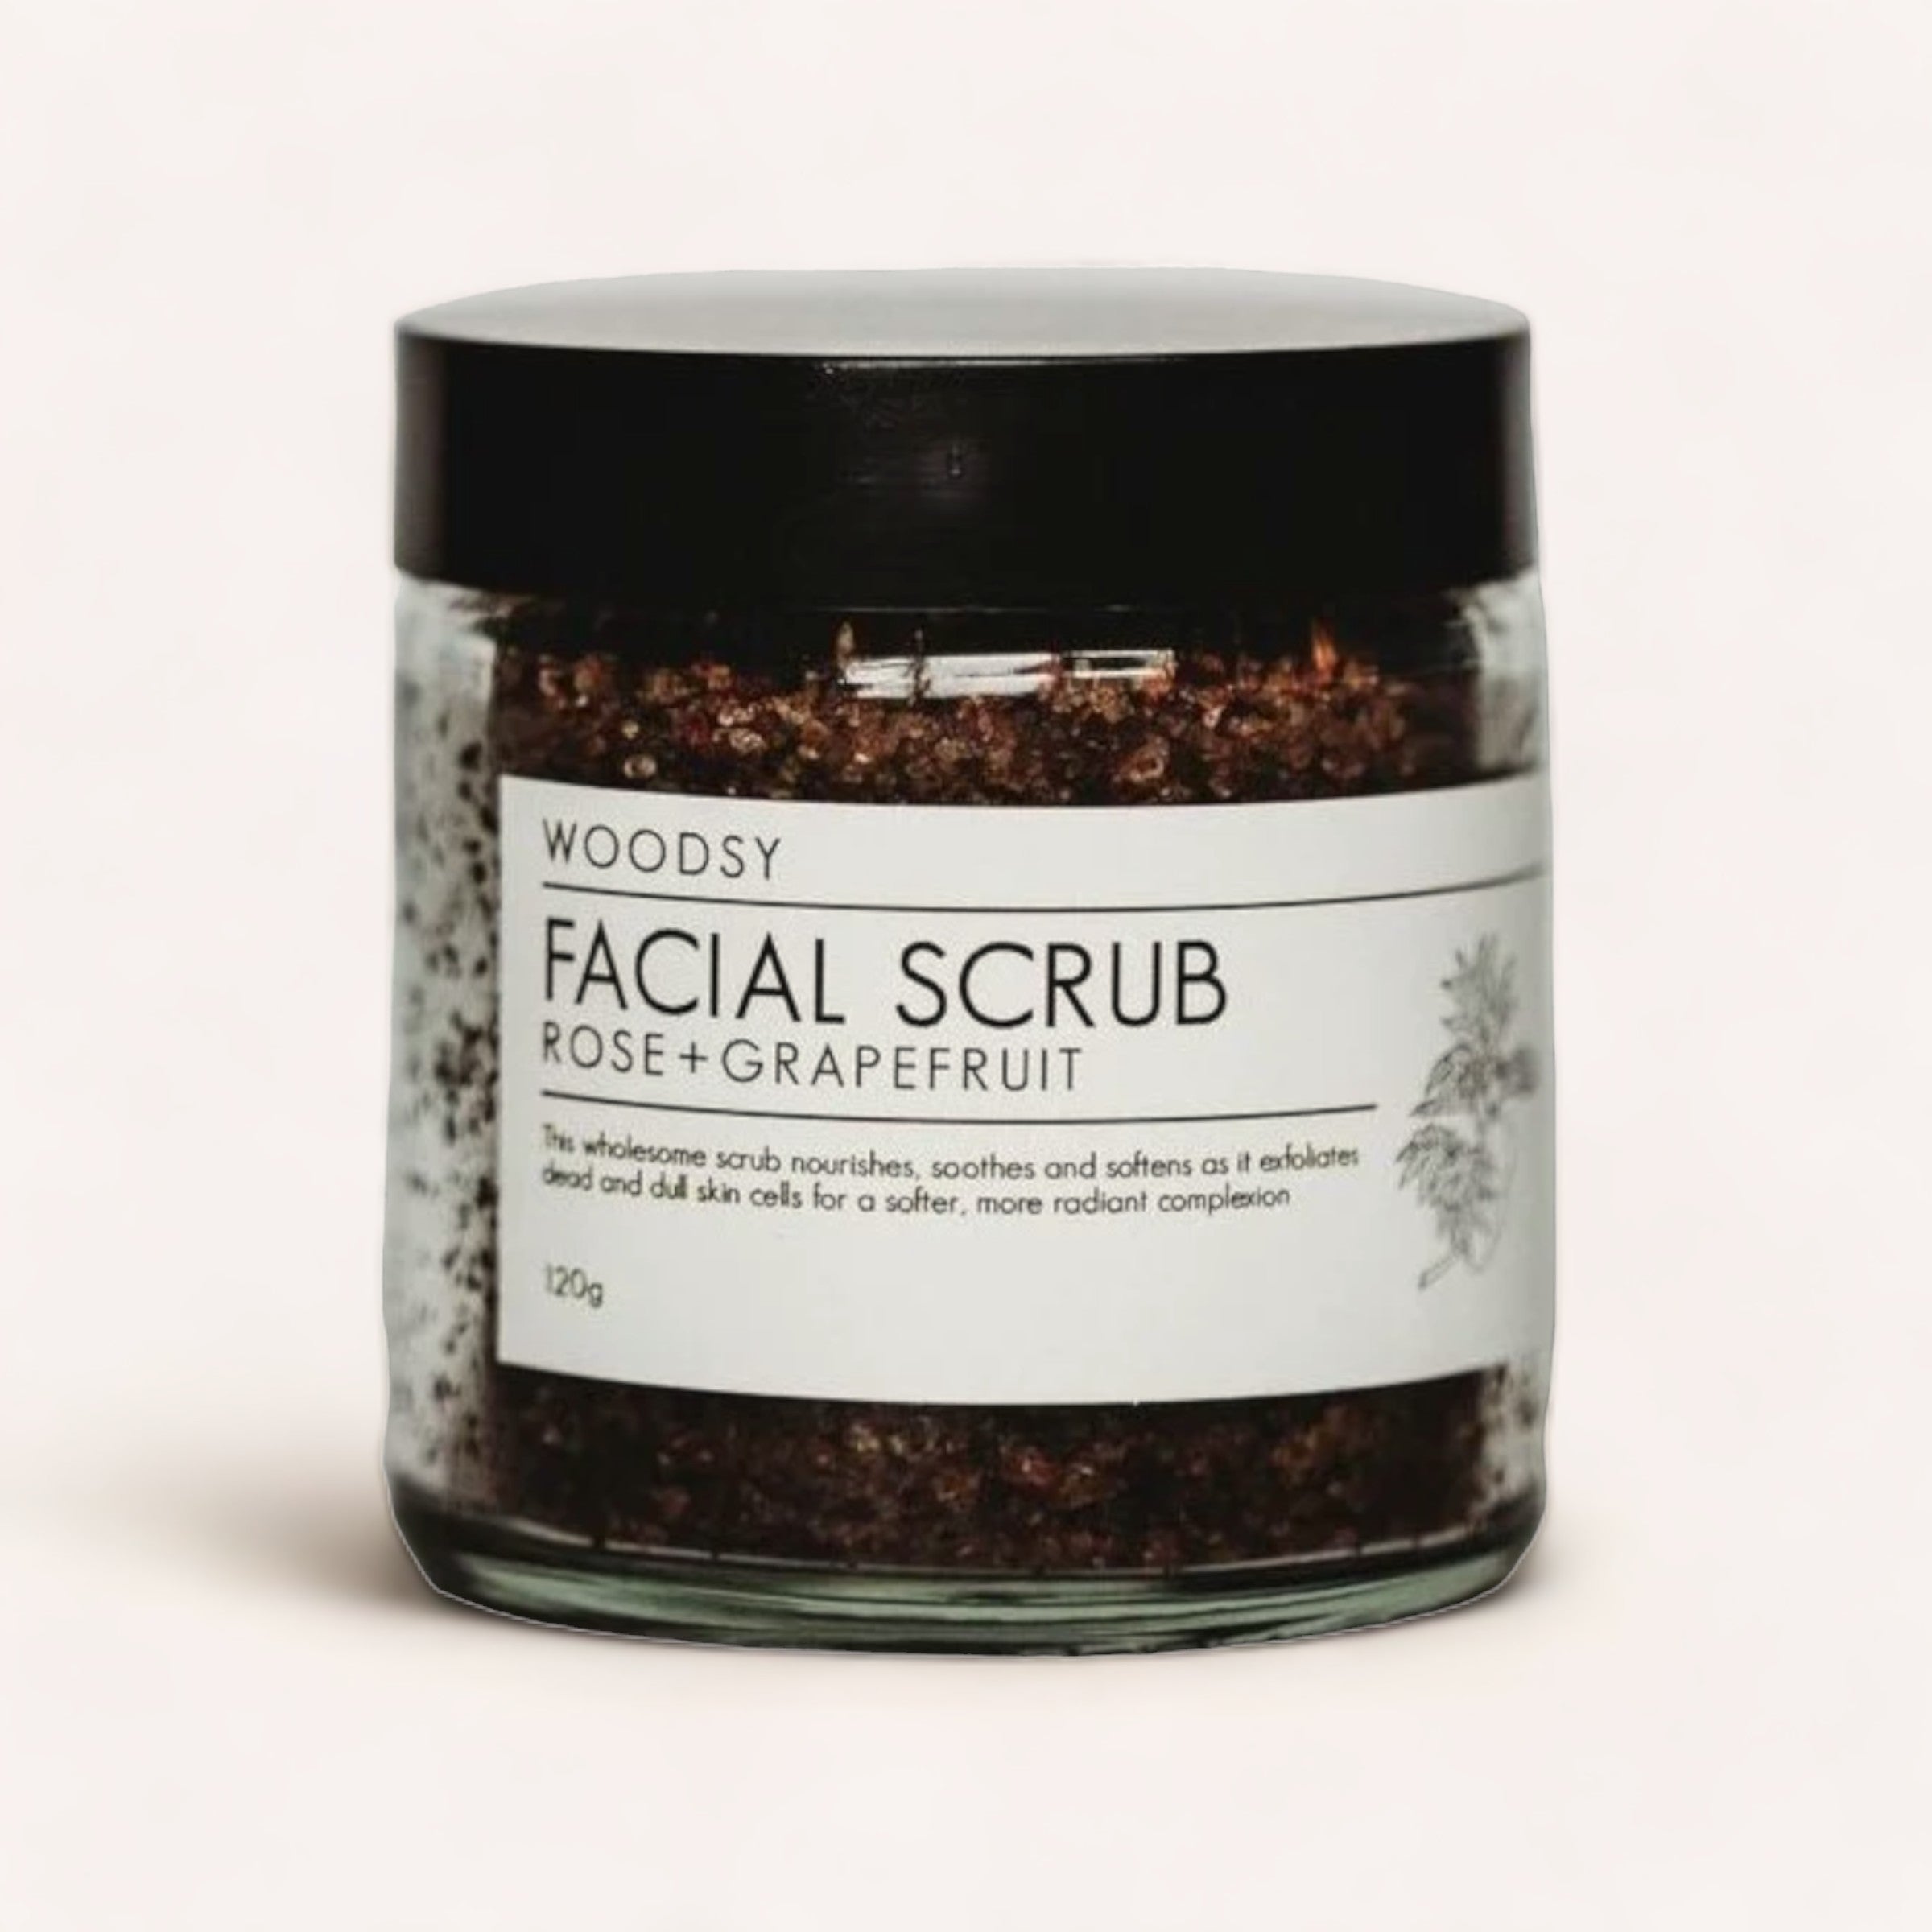 Sentence with replaced product and brand name: A jar of Facial Scrub - Rose & Grapefruit by Woodsy Botanics, intended to nourish, soothe, and soften the skin for a radiant complexion while facilitating the removal of dead skin cells.